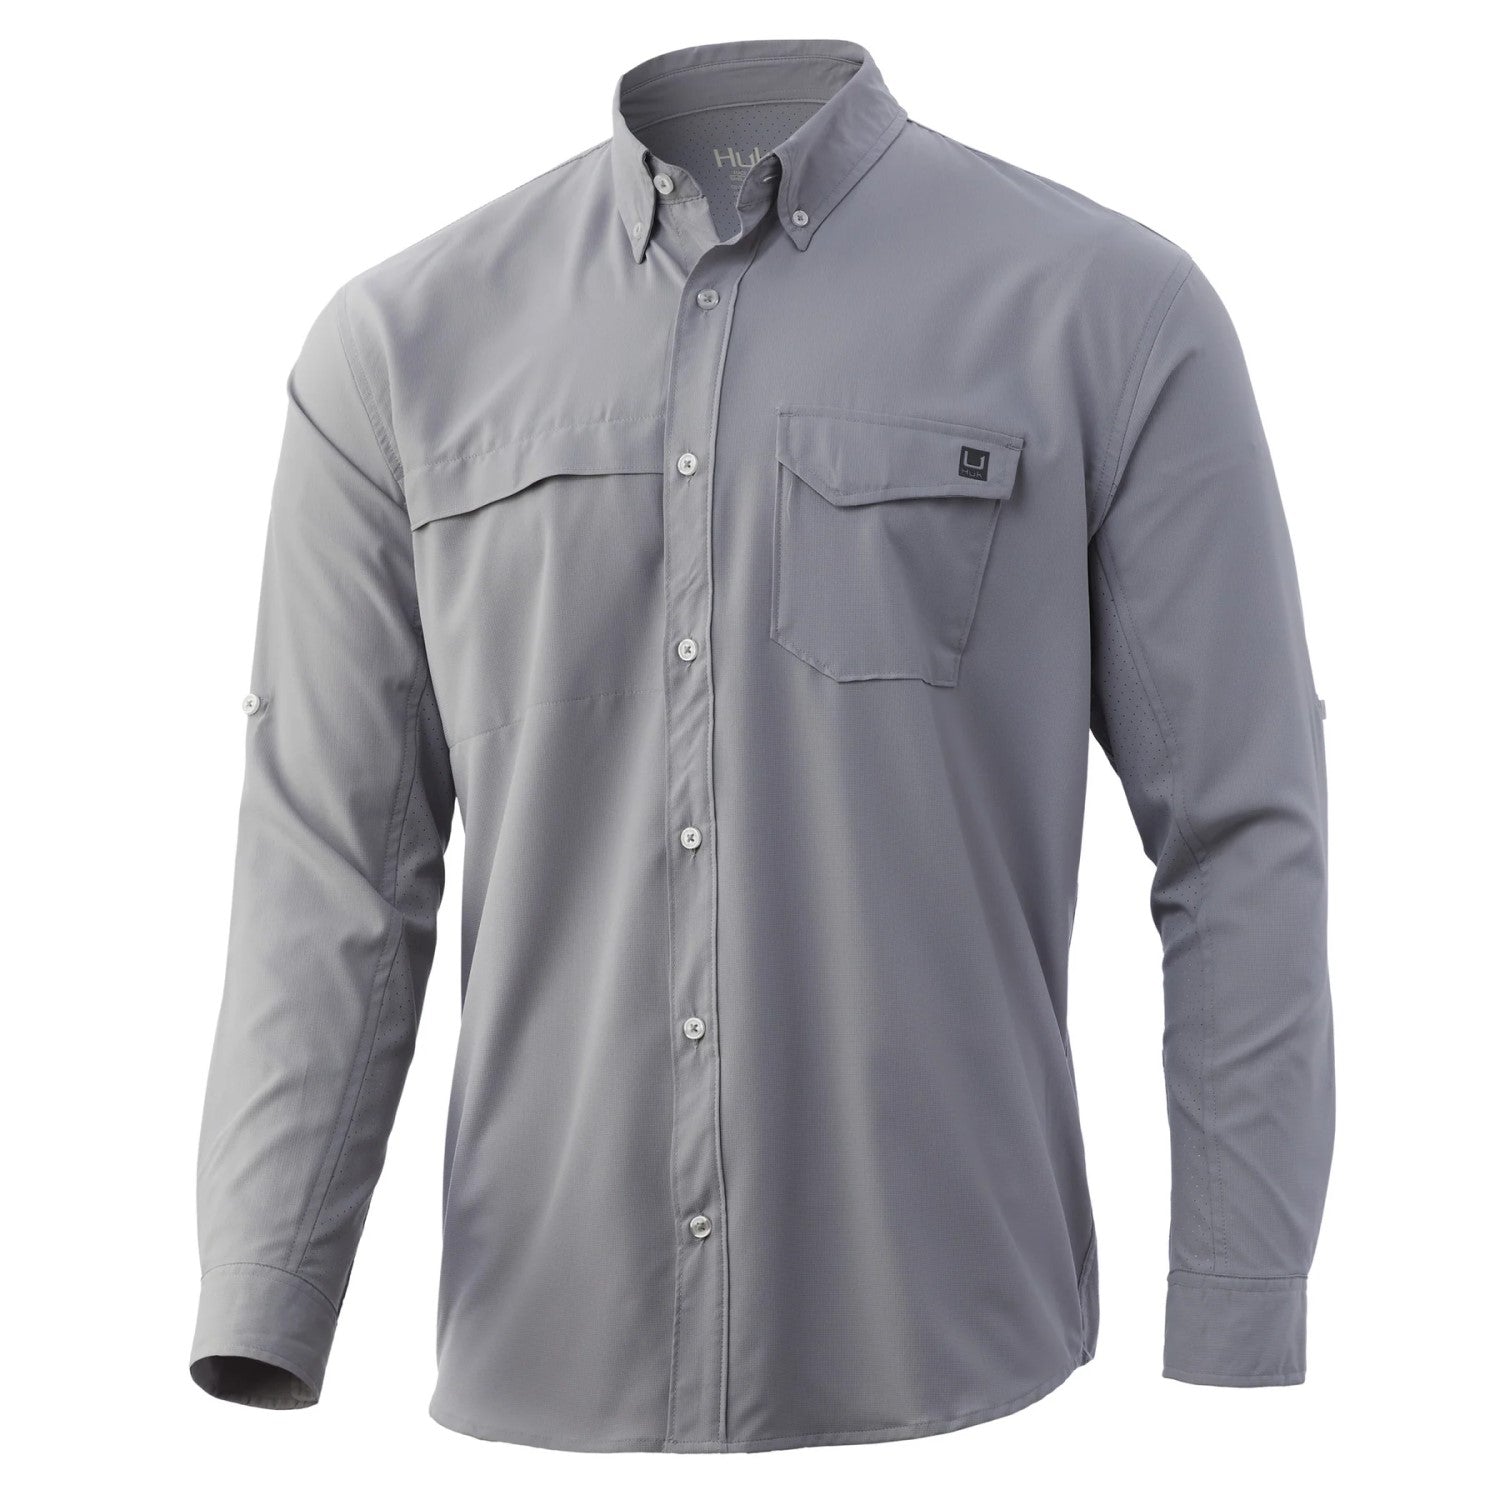 Huk Tide Point LS Fishing Shirt - Overcast Grey Front